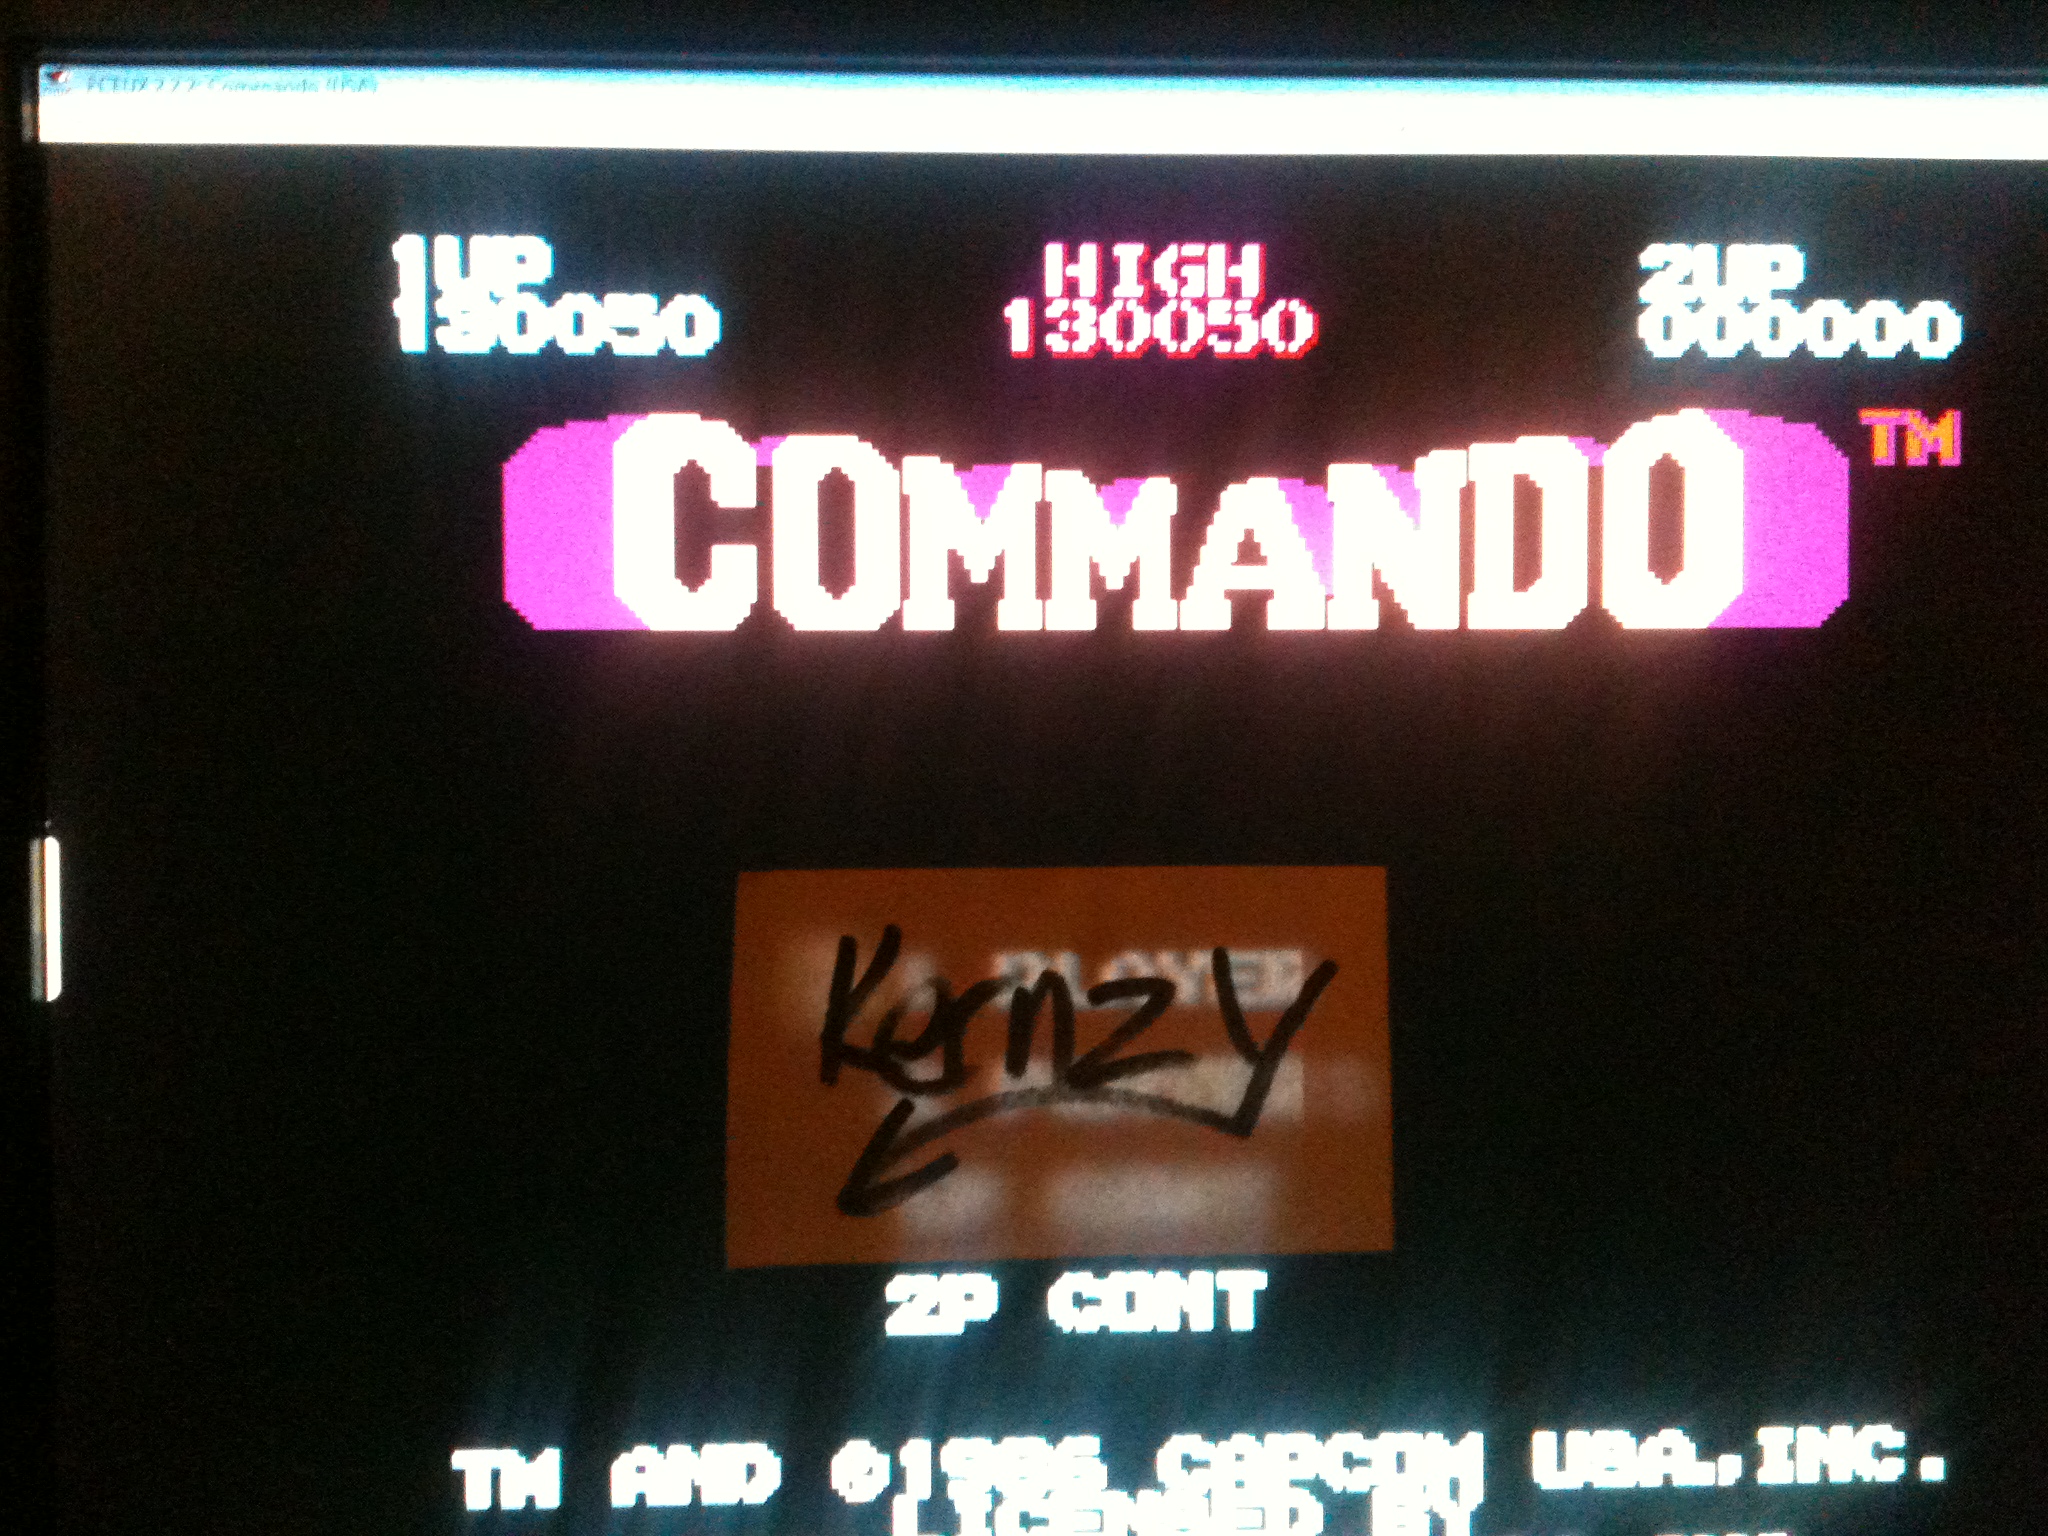 kernzy: Commando (NES/Famicom Emulated) 130,050 points on 2014-11-22 17:36:47